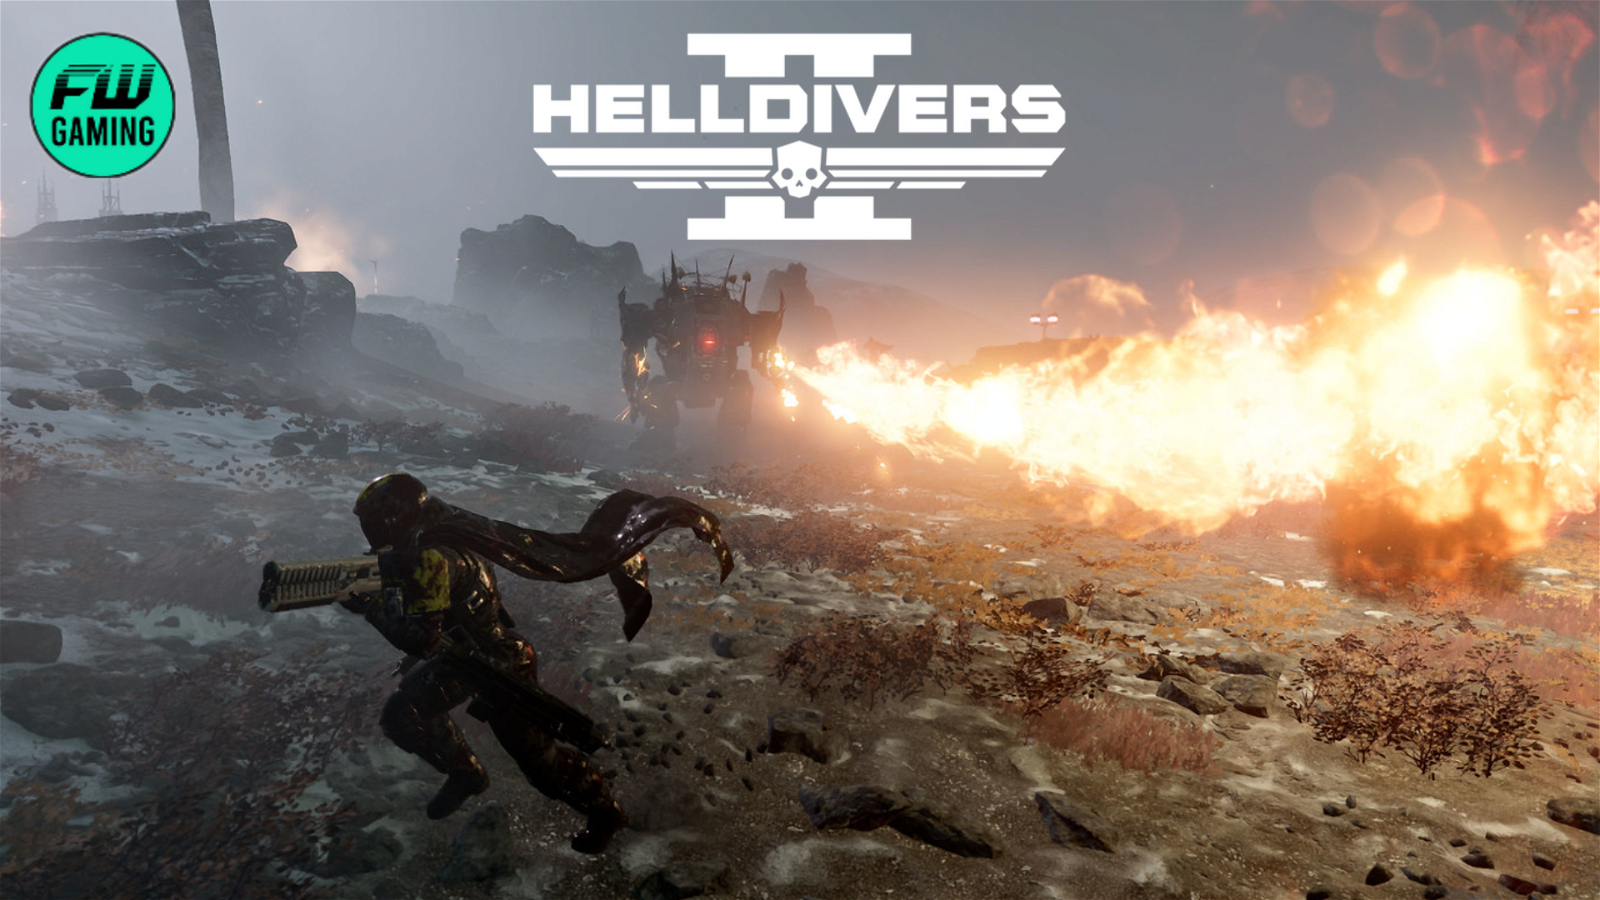 Helldivers 2 PC Specs Are Quite Reasonable for Such Fluid Gameplay and Graphics